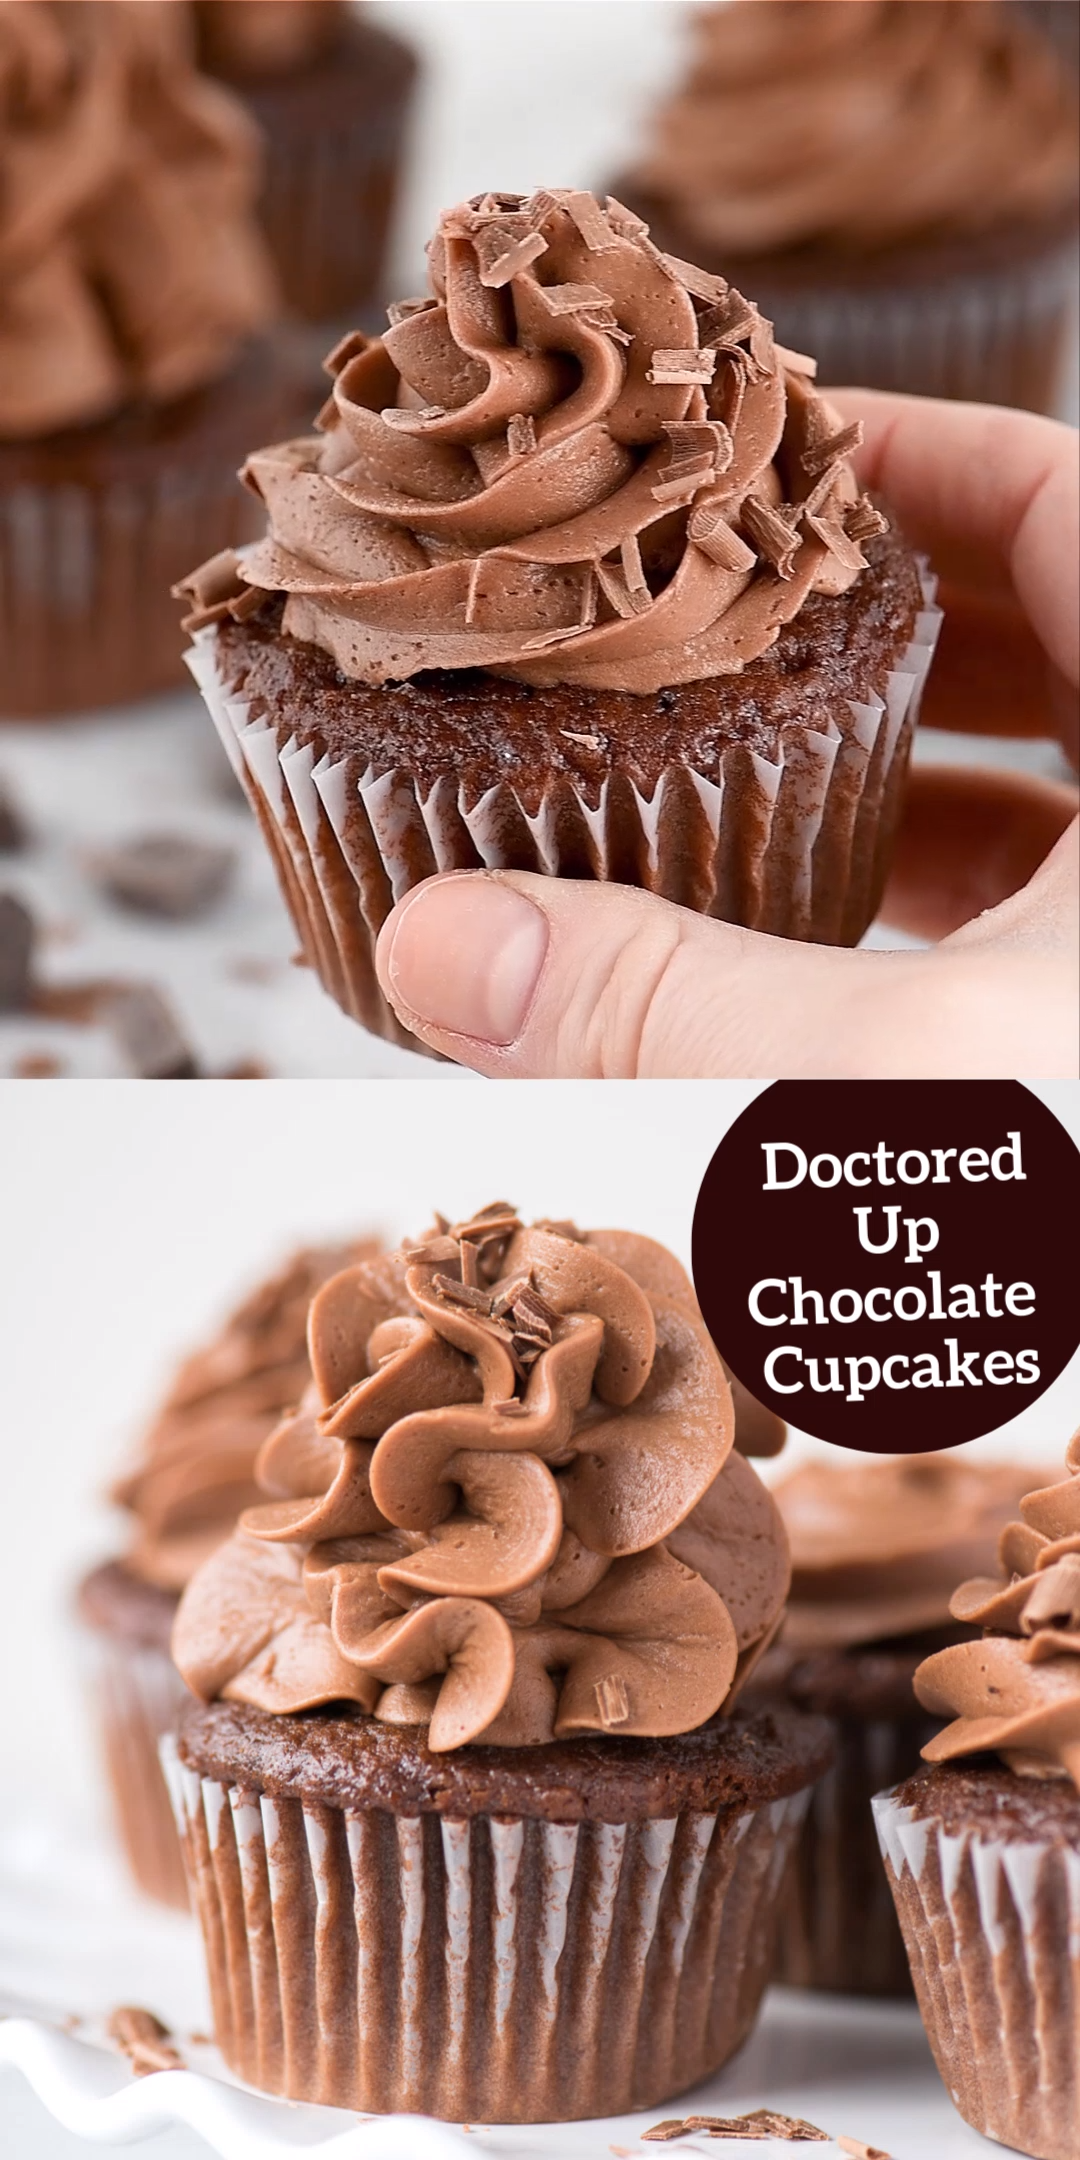 Doctored Up Chocolate Cupcakes -   14 desserts Fancy cupcake ideas